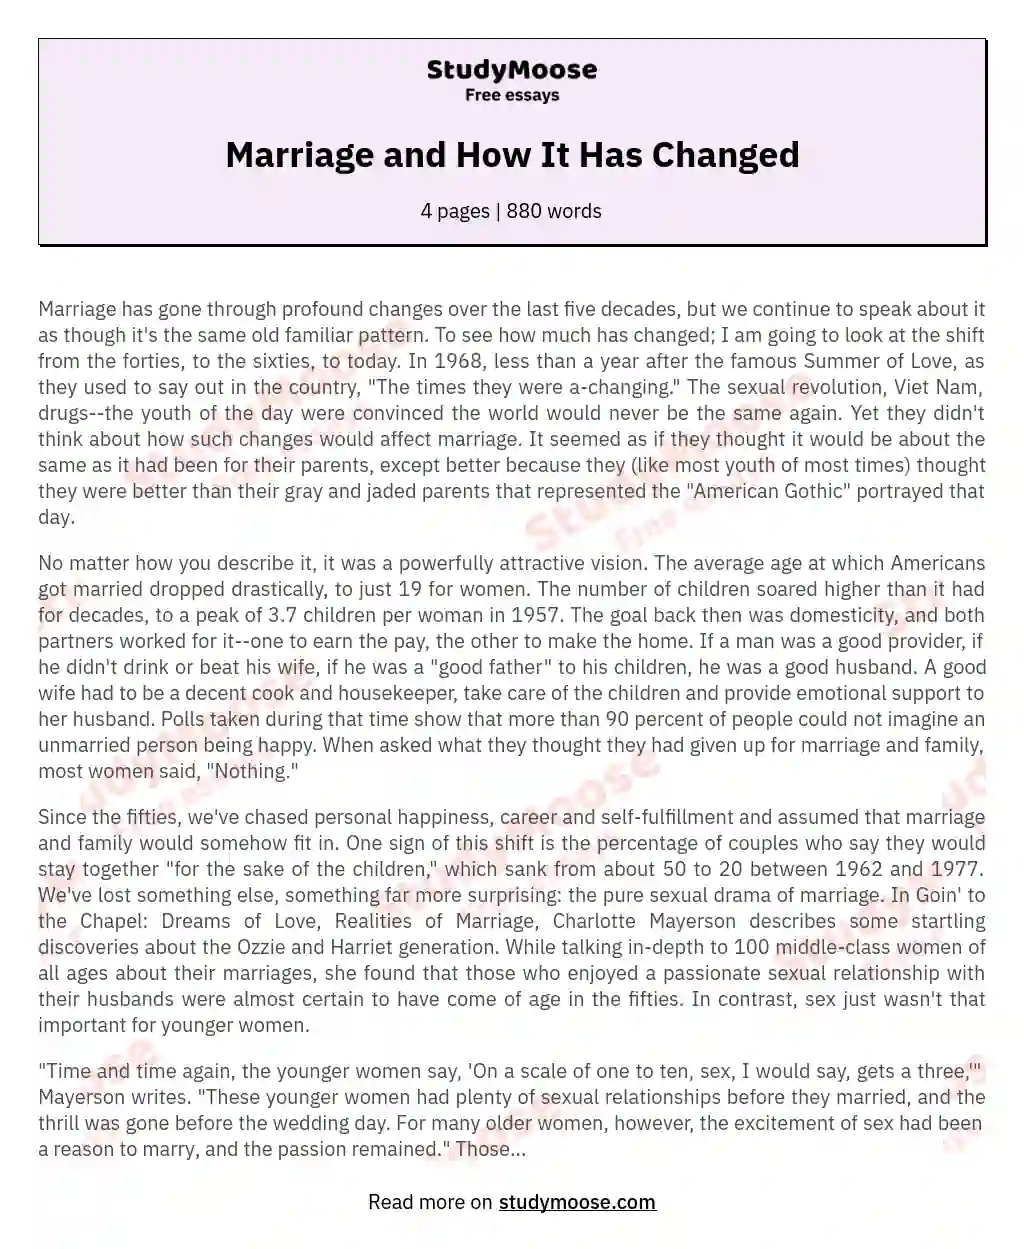 Marriage and How It Has Changed